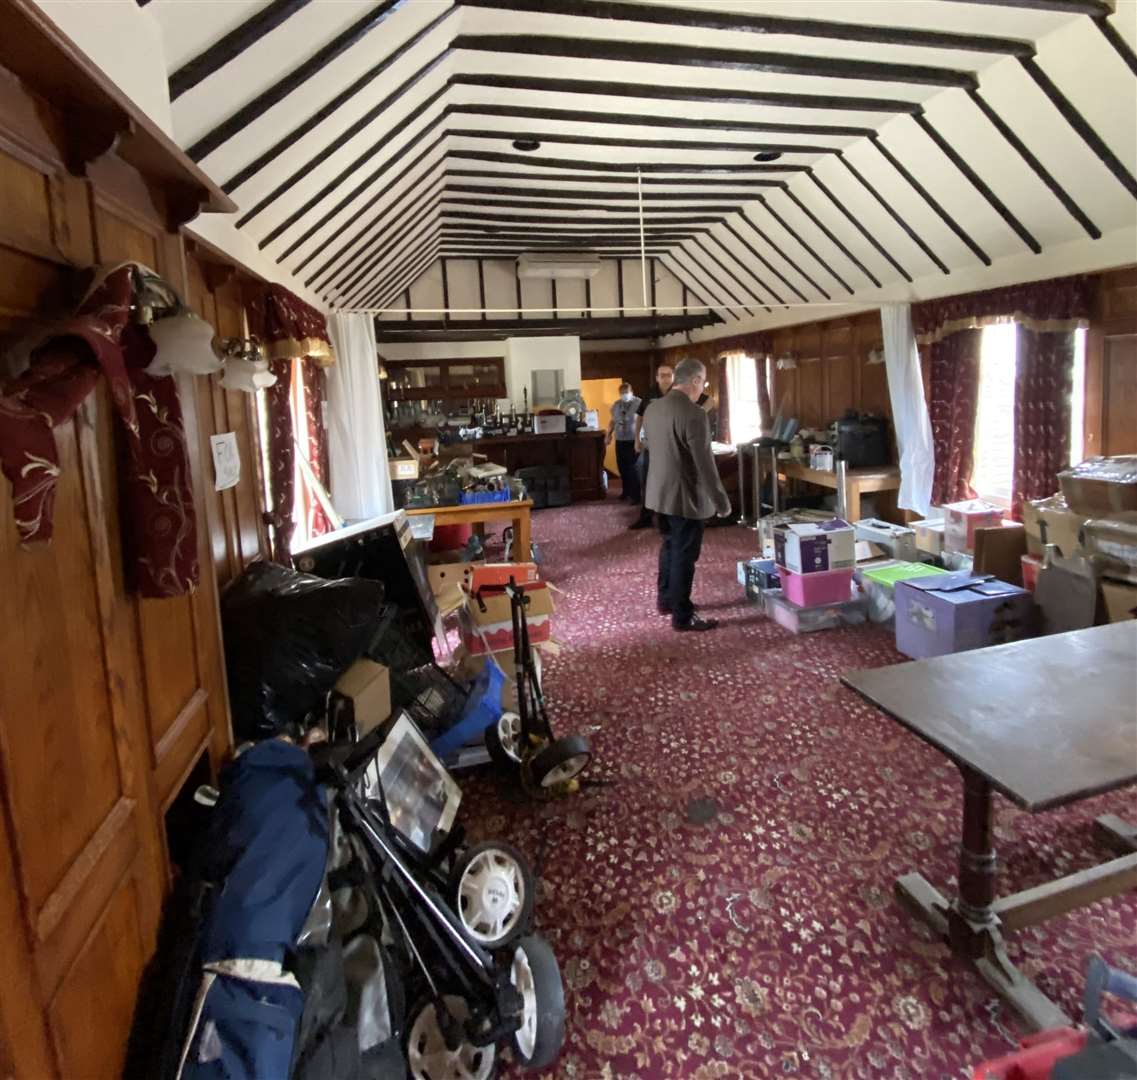 King's Head Sutton Valence function room before renovation. Picture: Zak Warwood